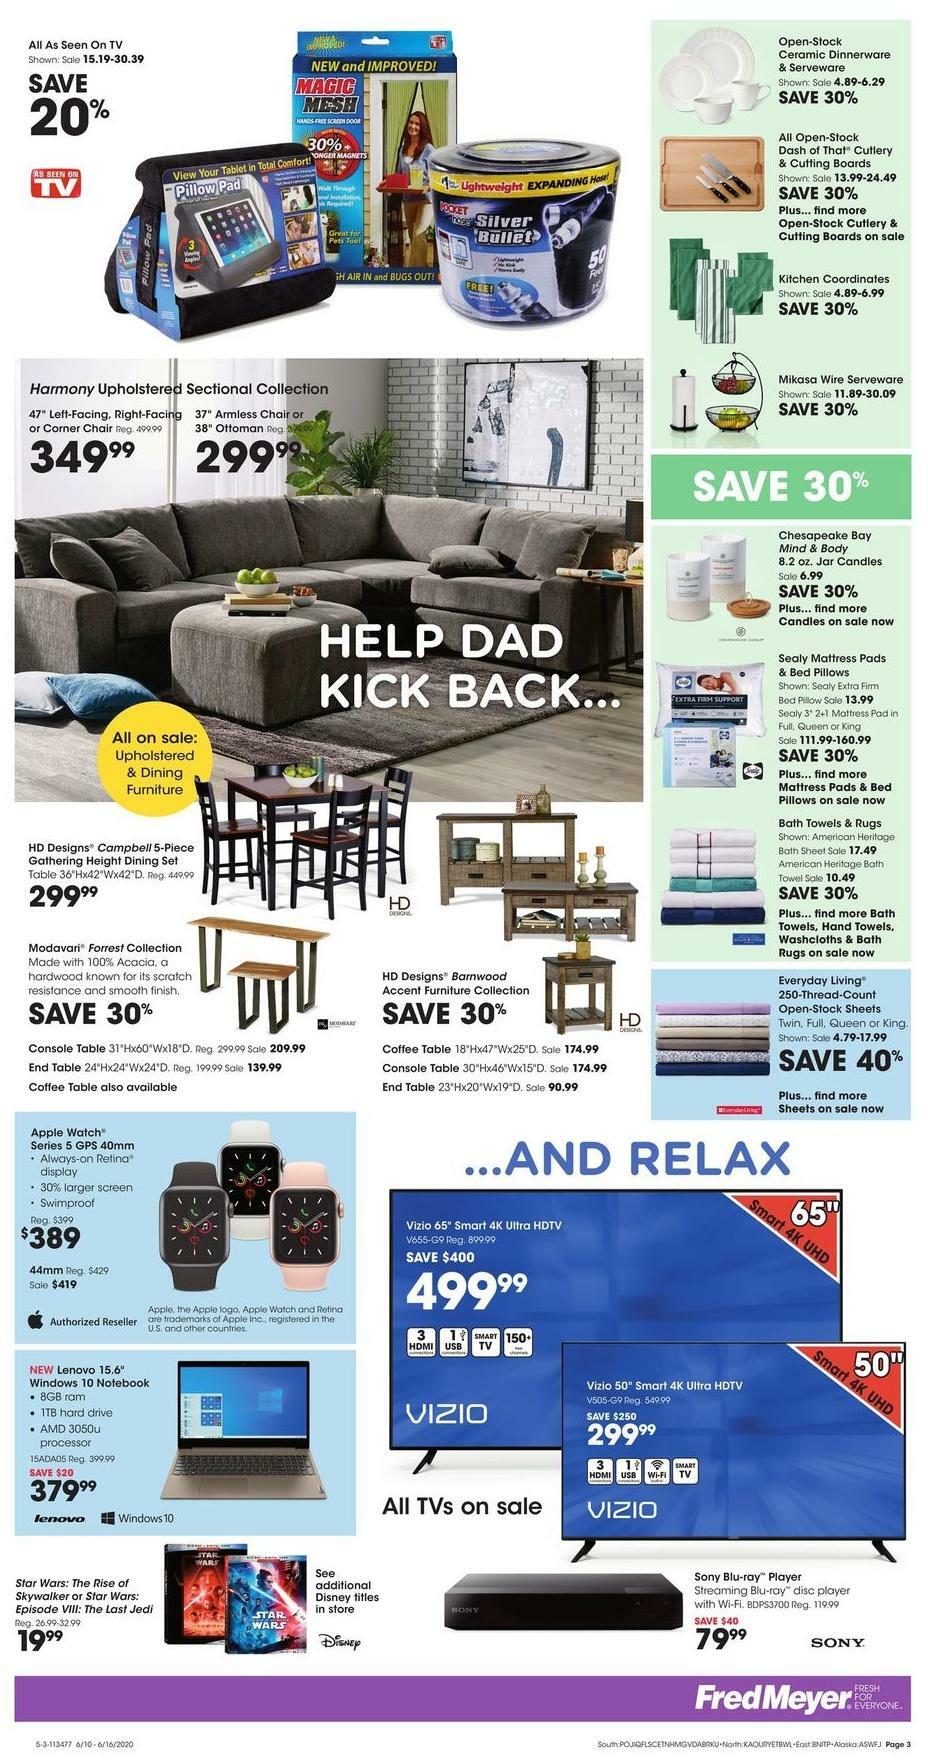 Fred Meyer General Merchandise Weekly Ad from June 10